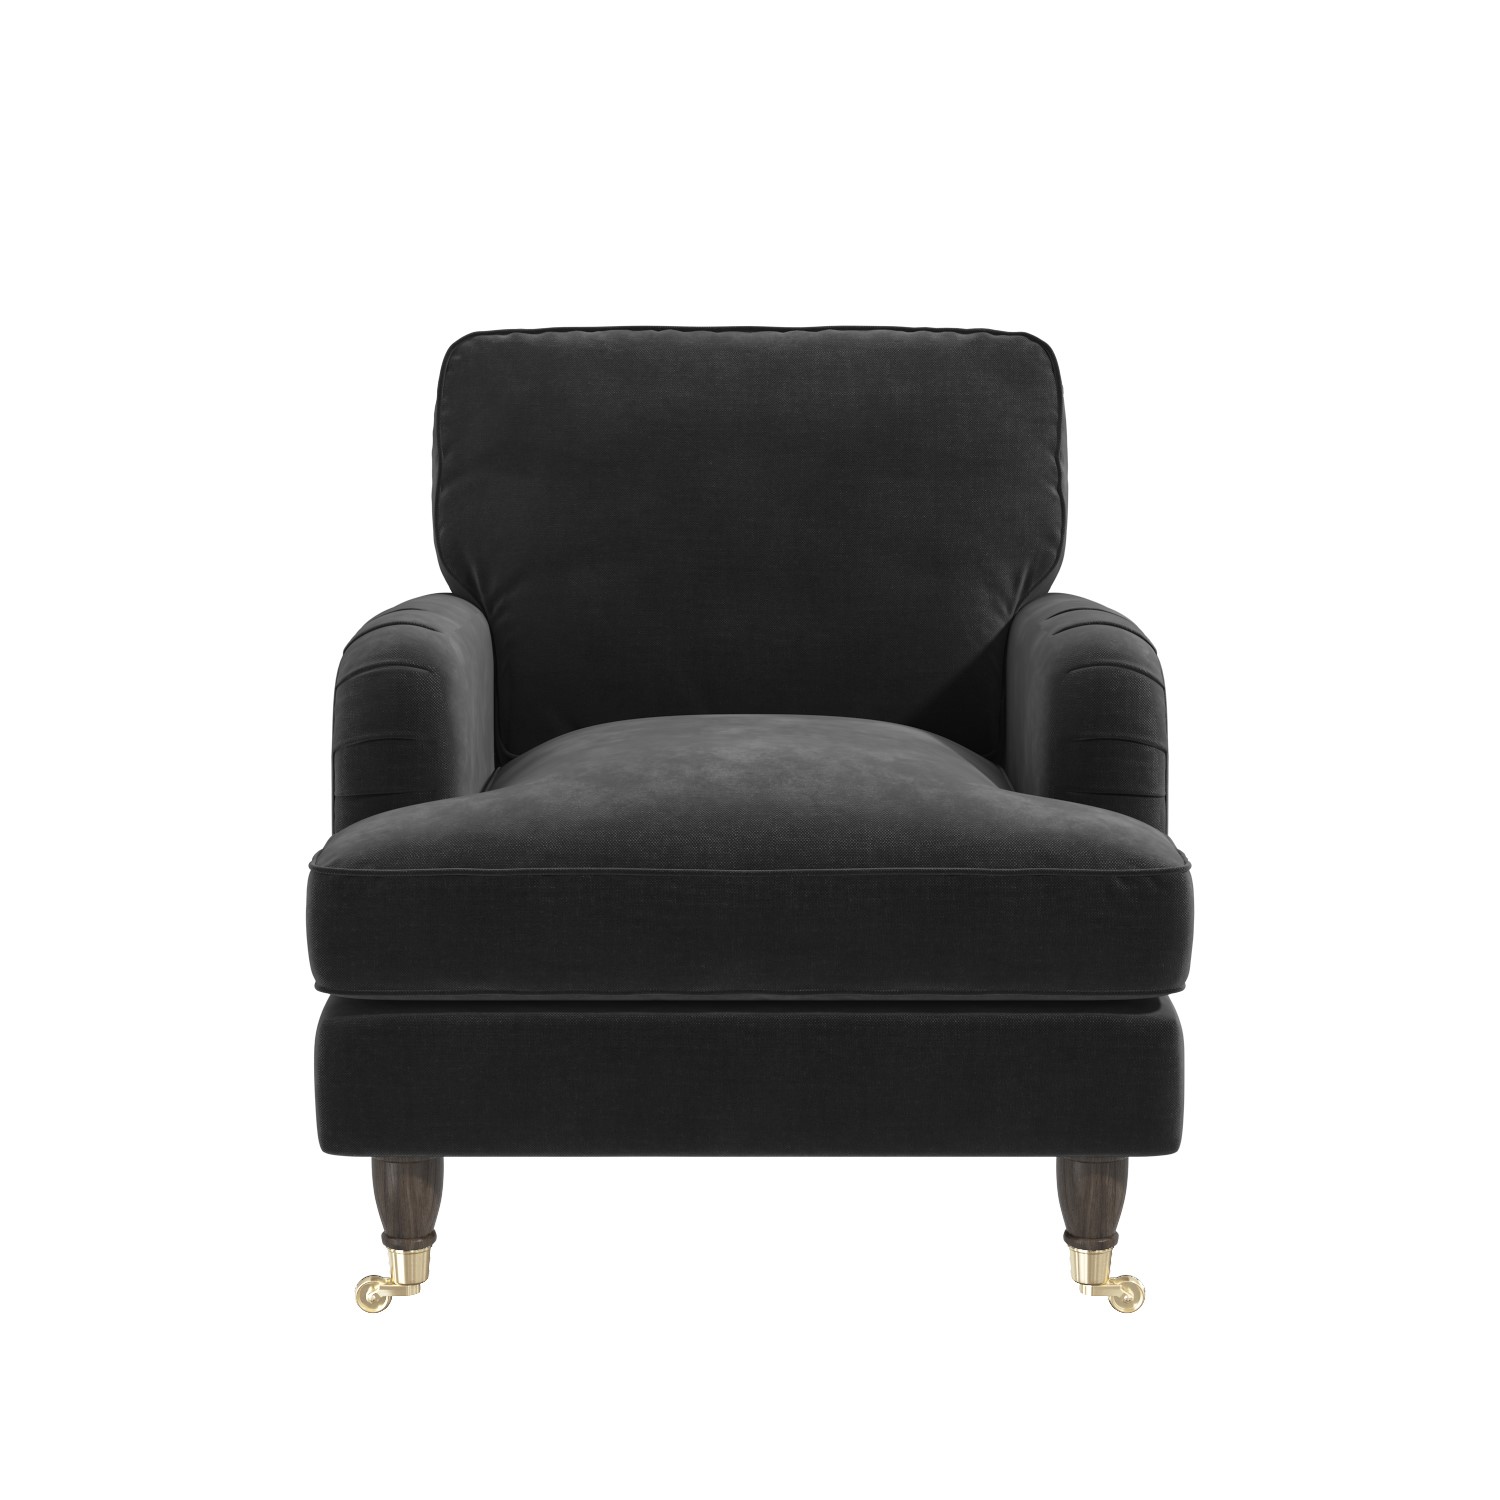 Read more about Charcoal velvet armchair payton